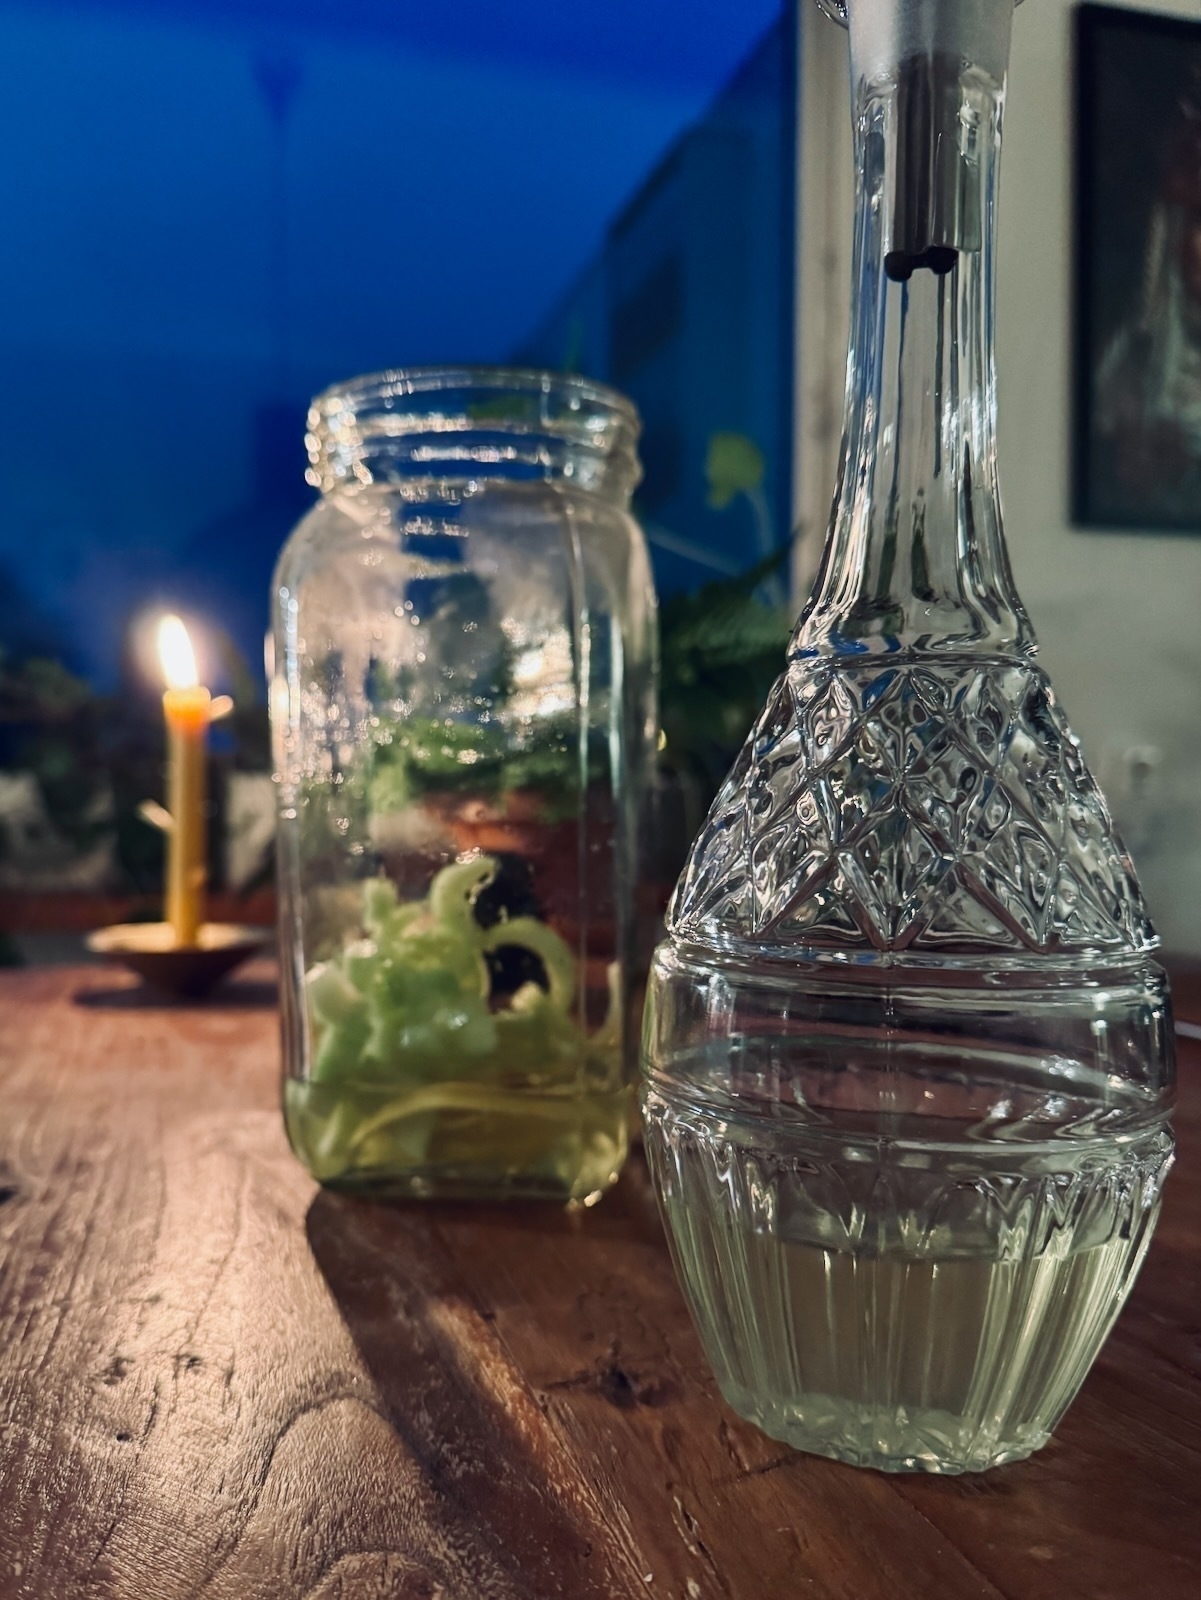 On the same table, an elegant crystal decanter and a glass jar brim with a mix of cucumber and lemon zest.